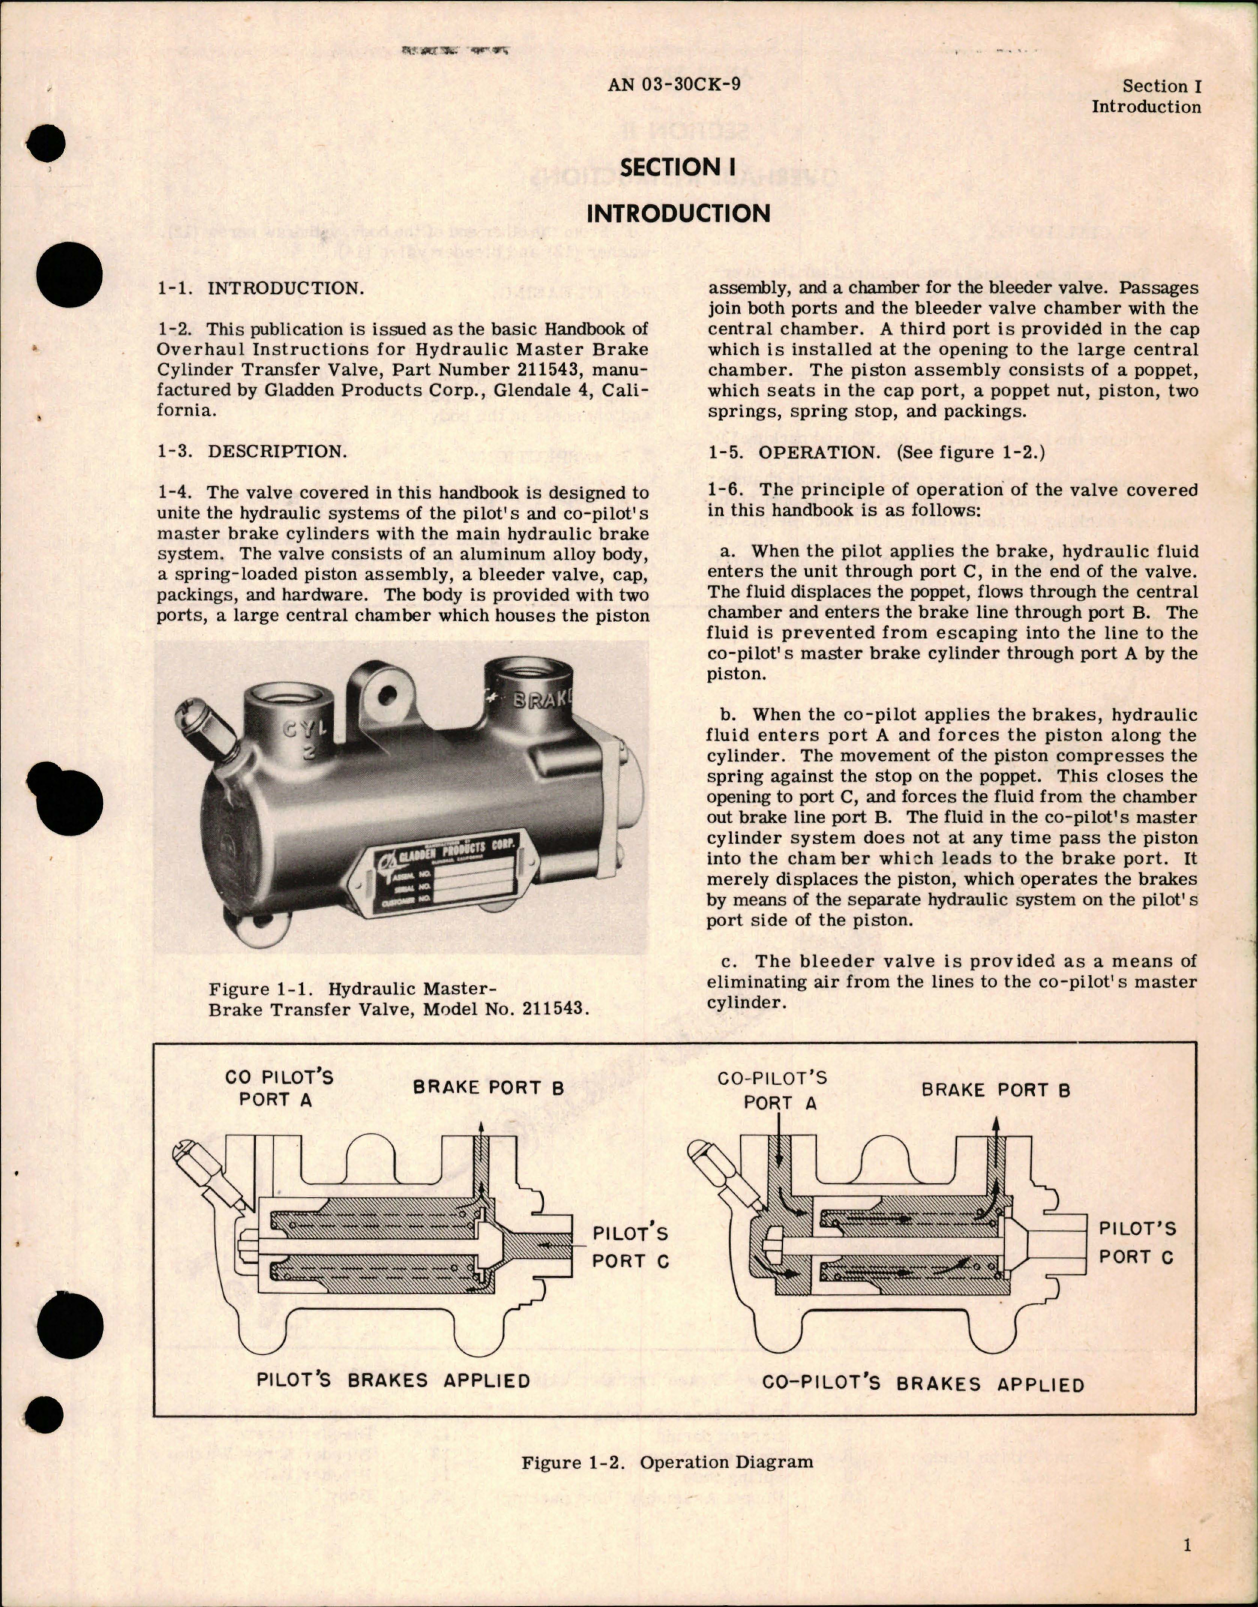 Sample page 5 from AirCorps Library document: Overhaul Instructions for Hydraulic Master Brake Cylinder Transfer Valve - Part 211543